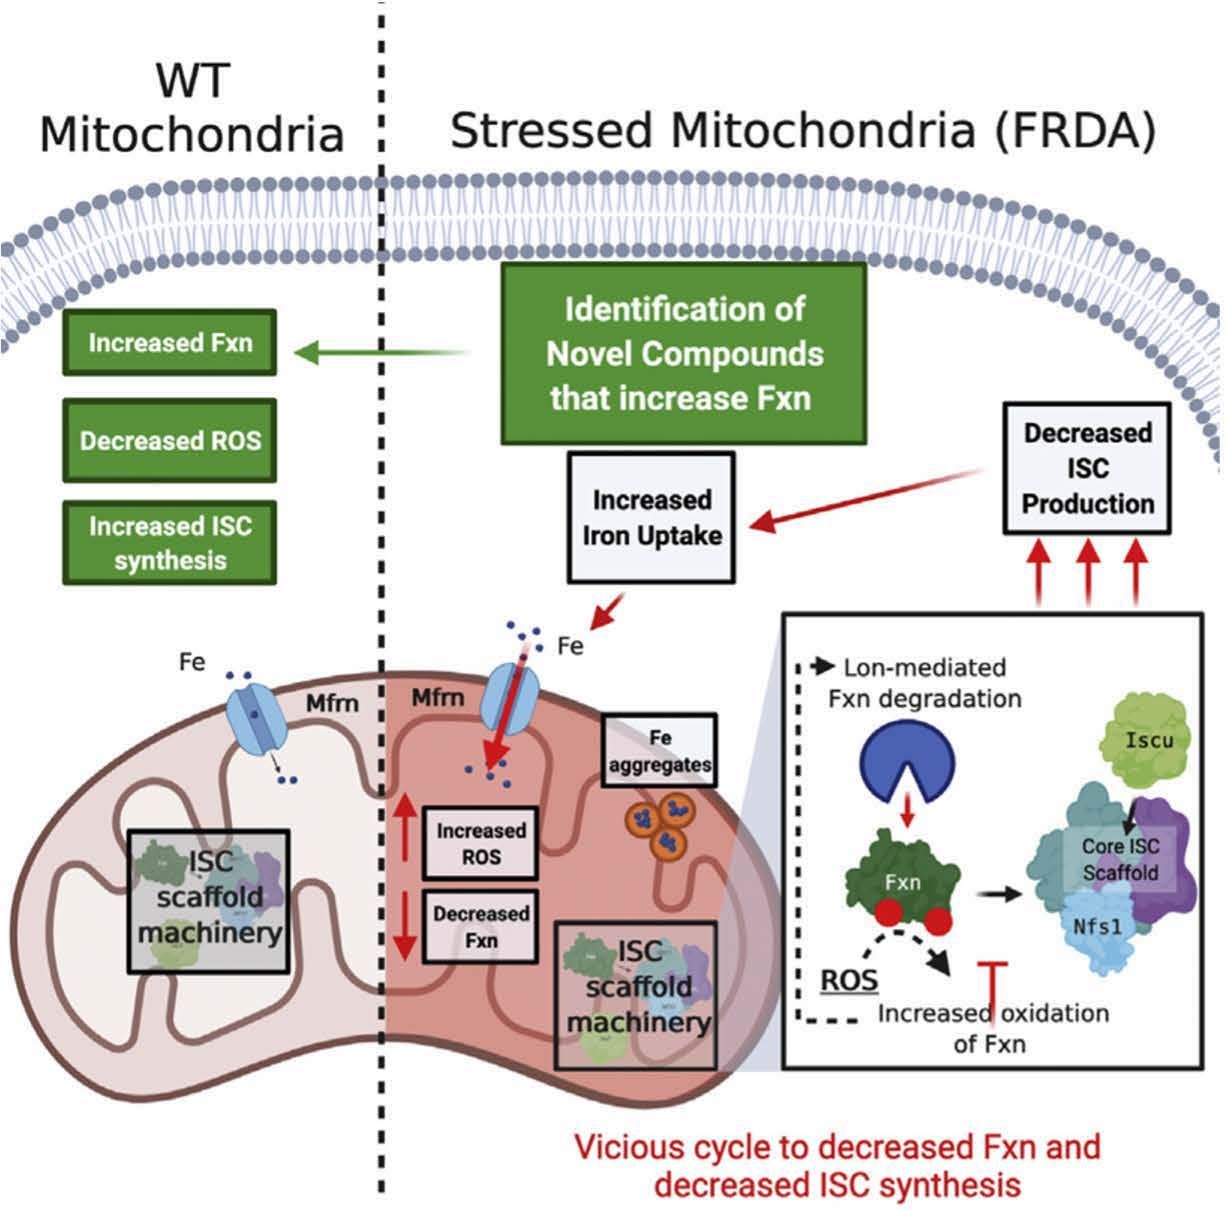 Click the image to enlarge.

FIGURE 2. FXN and ISC Assembly in Mitochondria9

FXN, a transcriptional target of NRF2, is critical for maintaining ISC assembly in the mitochondria. In FRDA, the characteristically diminished FXN levels result from aberrant NRF2 regulation. Compounds that increase FXN levels in FRDA cells can decrease ROS and increase ISC synthesis to delay disease progression.

Fe, iron; FRDA, Friedreich ataxia; FXN, frataxin; ISC, iron-sulfur cluster; Iscu, iron-sulfur cluster assembly enzyme; Nfs1, L-cysteine desulfurase; NRF2, nuclear factor erythroid 2-related factor 2; ROS, reactive oxygen species; WT, wild-type.

Figure reprinted with permission from Hackett PT, Jia X, Li L, Ward DM. Posttranslational regulation of mitochondrial frataxin and identification of compounds that increase frataxin levels in Friedreich’s ataxia. J Biol Chem. 2022;298(6):101982. doi:10.1016/j.jbc.2022.101982